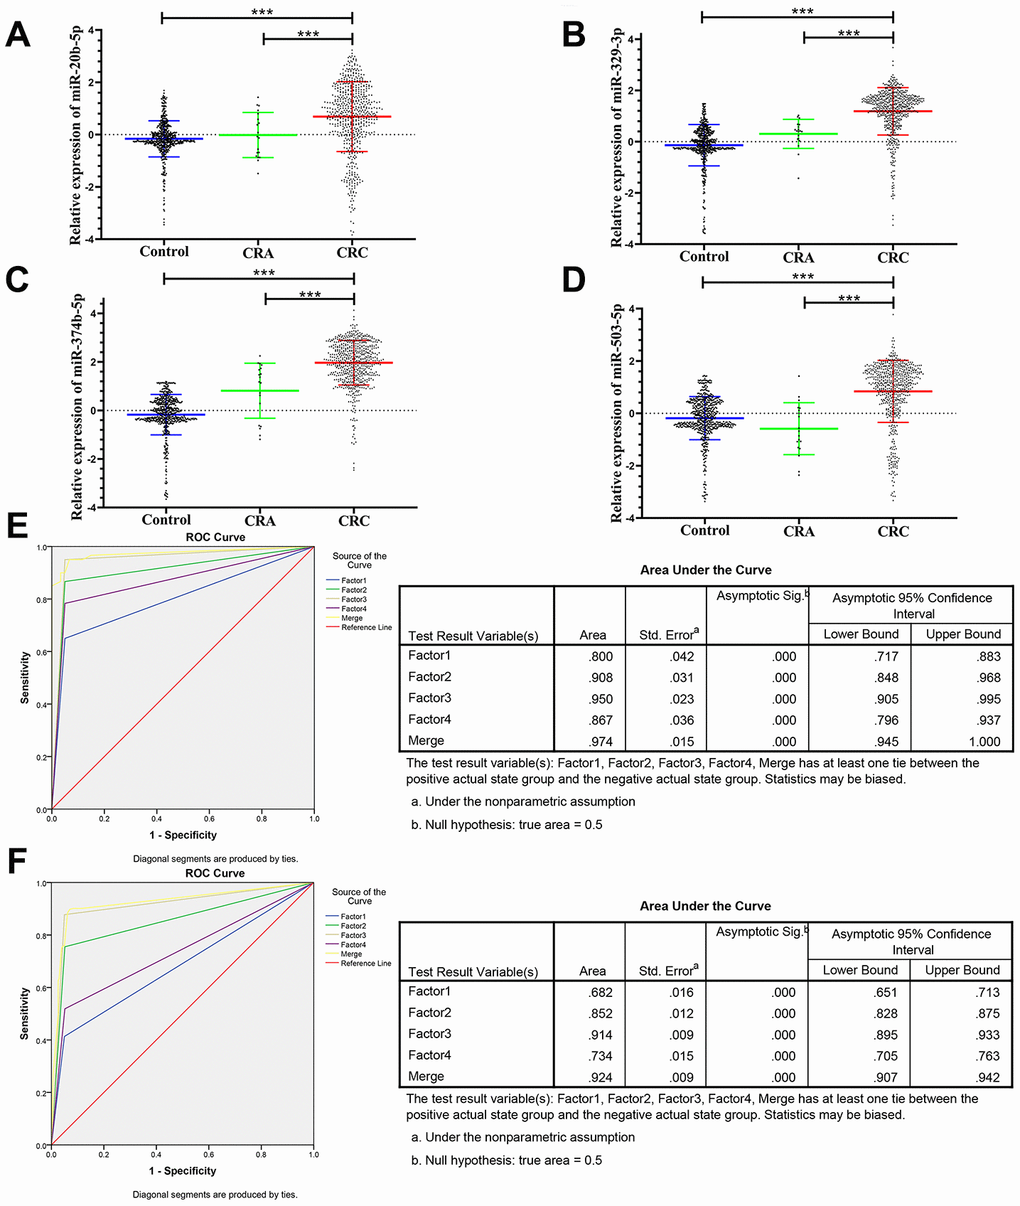 Relative expression of 4 microRNAs in HC, CRA and CRC, and ROC curve analysis for predicting the 4 microRNAs as CRC diagnosis biomarkers. (A–D) qRT-PCR analysis was used to detect the expression of miR-20b-5p, miR-329-3p, miR-374b-5p and miR-503-5p in 585 plasma samples from healthy controls, 19 samples of CRA patients and 597 plasma samples from CRC patients. Data was log-transformed and was presented as mean ± SD. Data was analyzed with student t test. “***” indicated p E) ROC curve for the 4-microRNA signature to separate 60 CRC cases from 60 controls in the training set with the AUC presented in the right. (F) ROC curve analysis was used for the 4-microRNA signature to differentiate 597 CRC cases from 585 controls in the validation set with the AUC presented in the right. Factor1, 2, 3, 4 and merged represented the miR-20b-5p, miR-329-3p, miR-374b-5p, miR-503-5p and the combination of the 4 microRNAs.